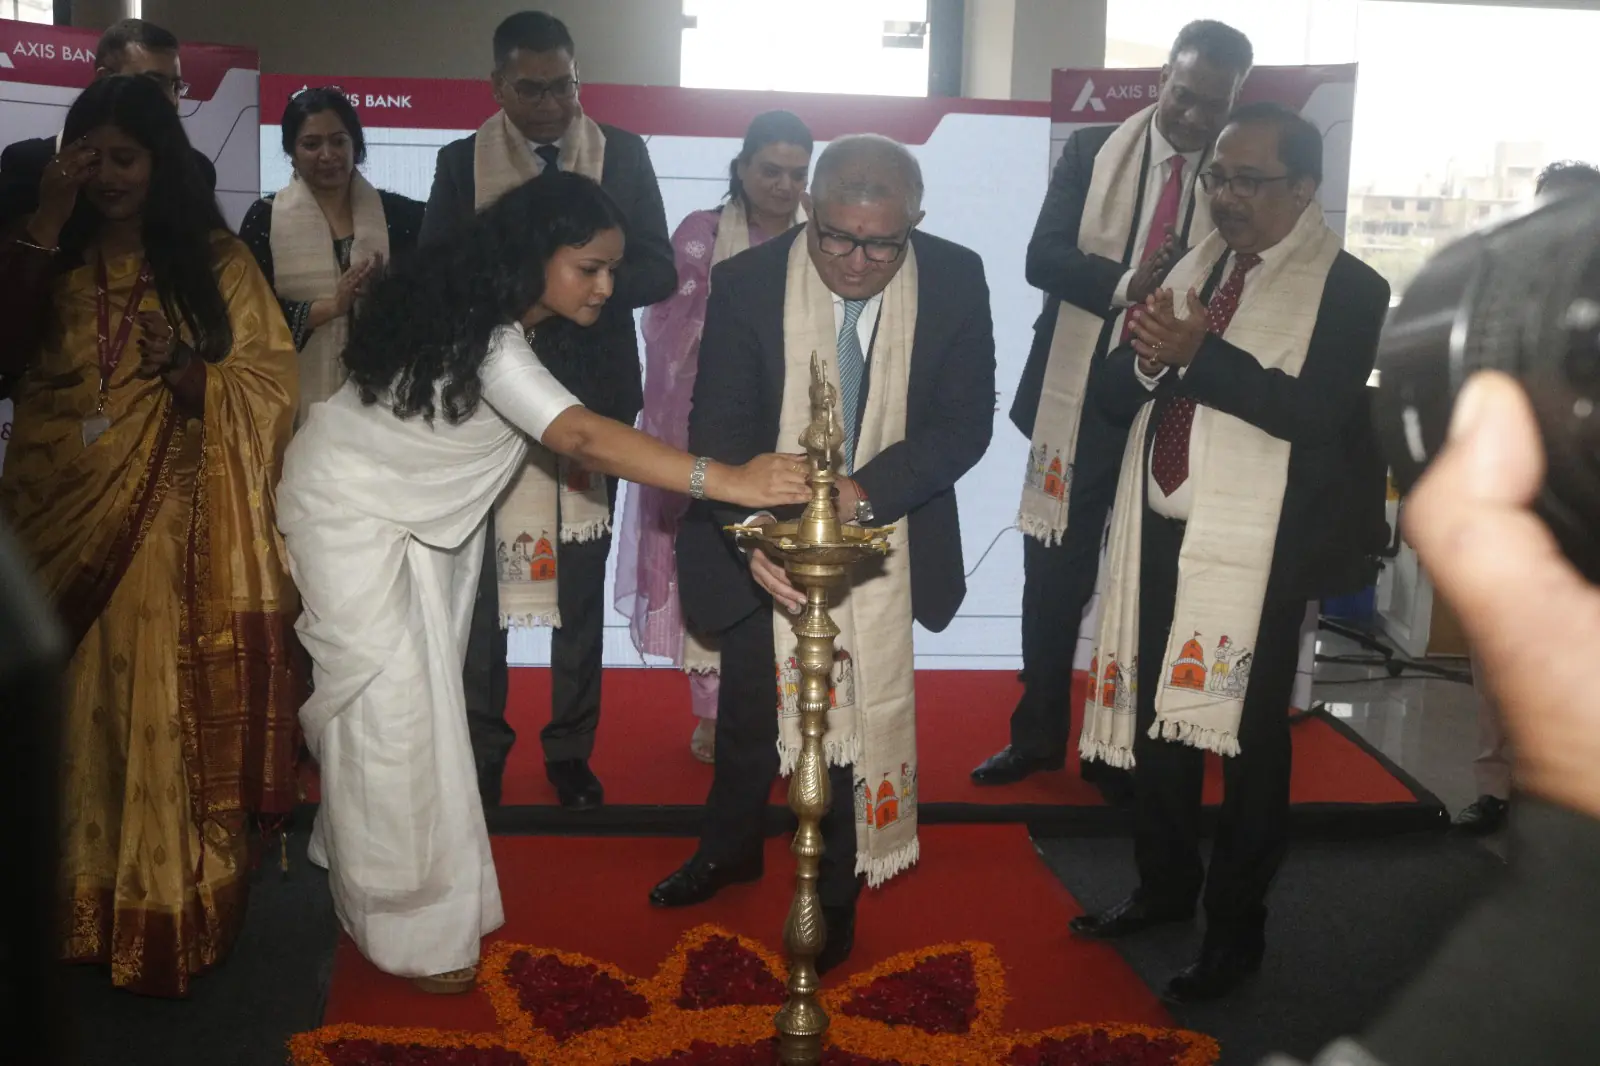 Axis Bank unveils its Regional Office in Jharkhand, enhances Banking services across Eastern India.